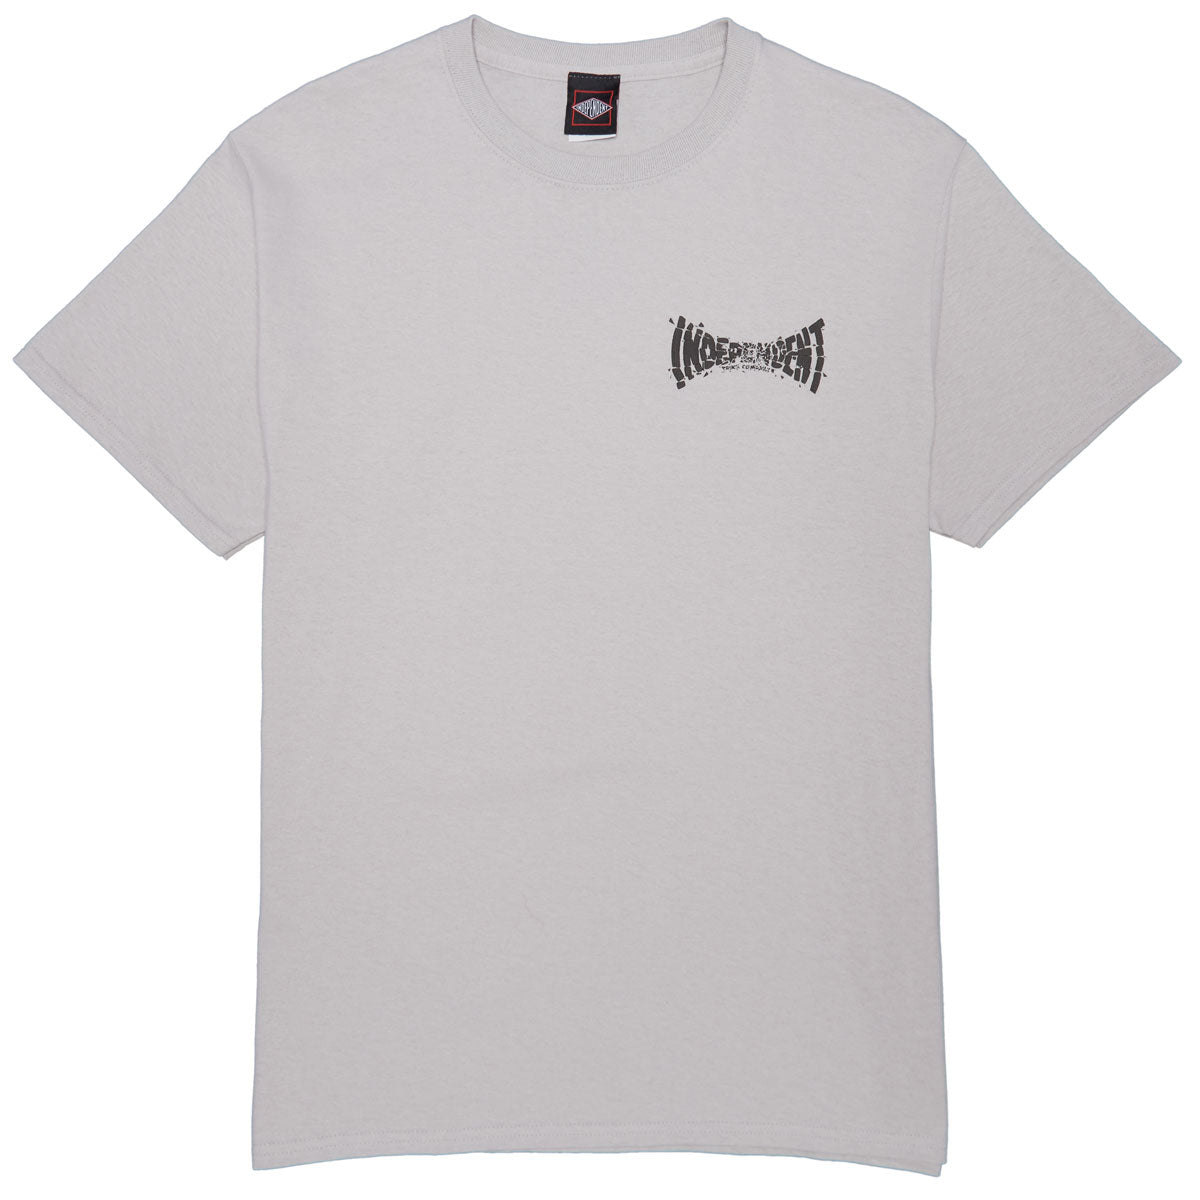 Independent Shatter Span T-Shirt - Silver image 2